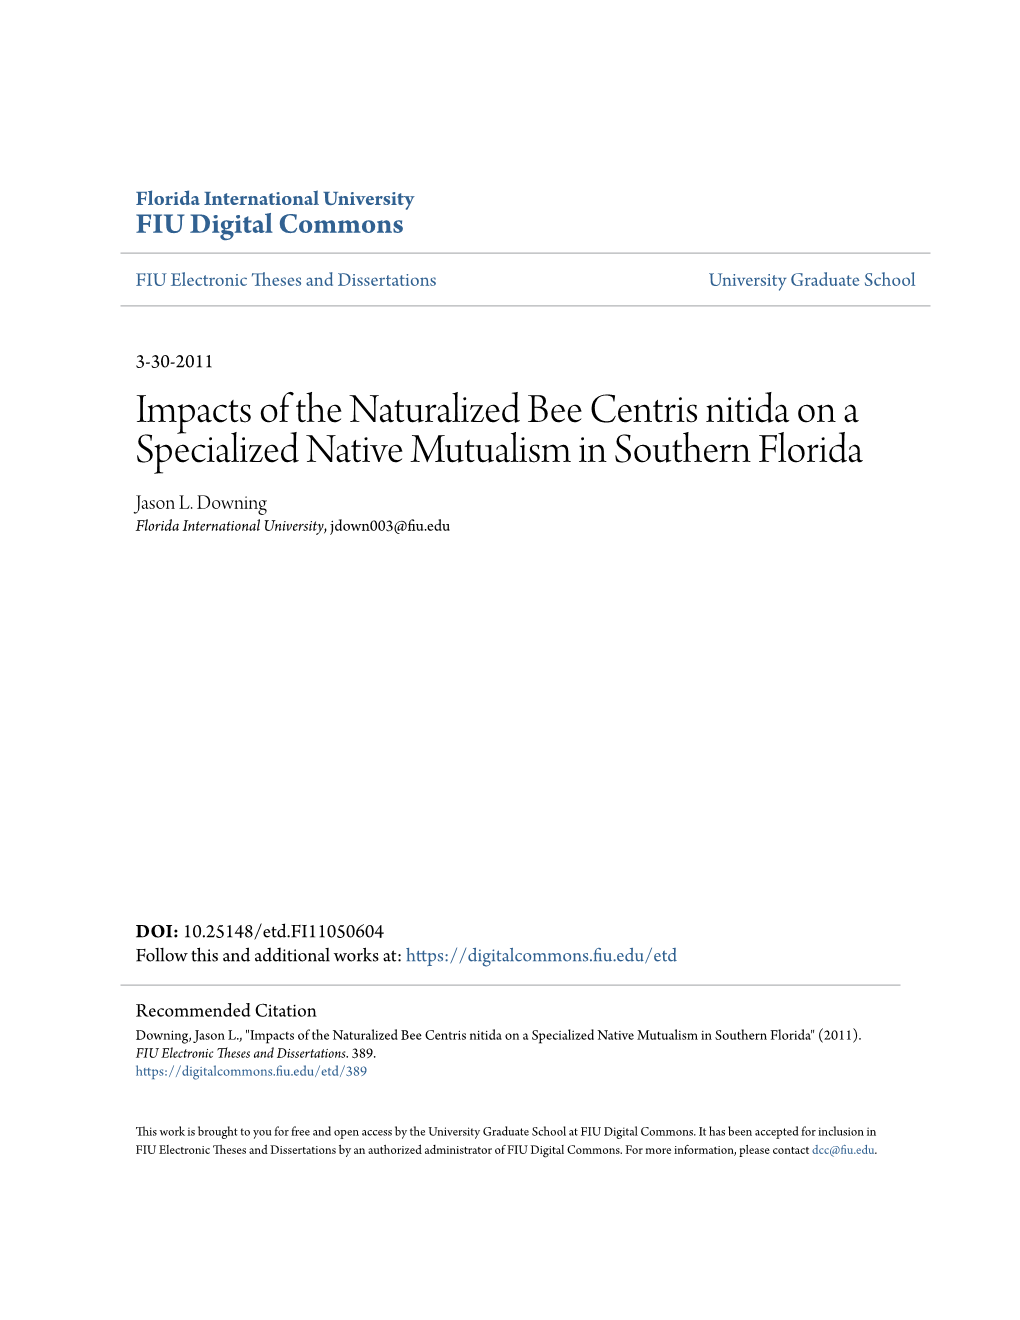 Impacts of the Naturalized Bee Centris Nitida on a Specialized Native Mutualism in Southern Florida Jason L